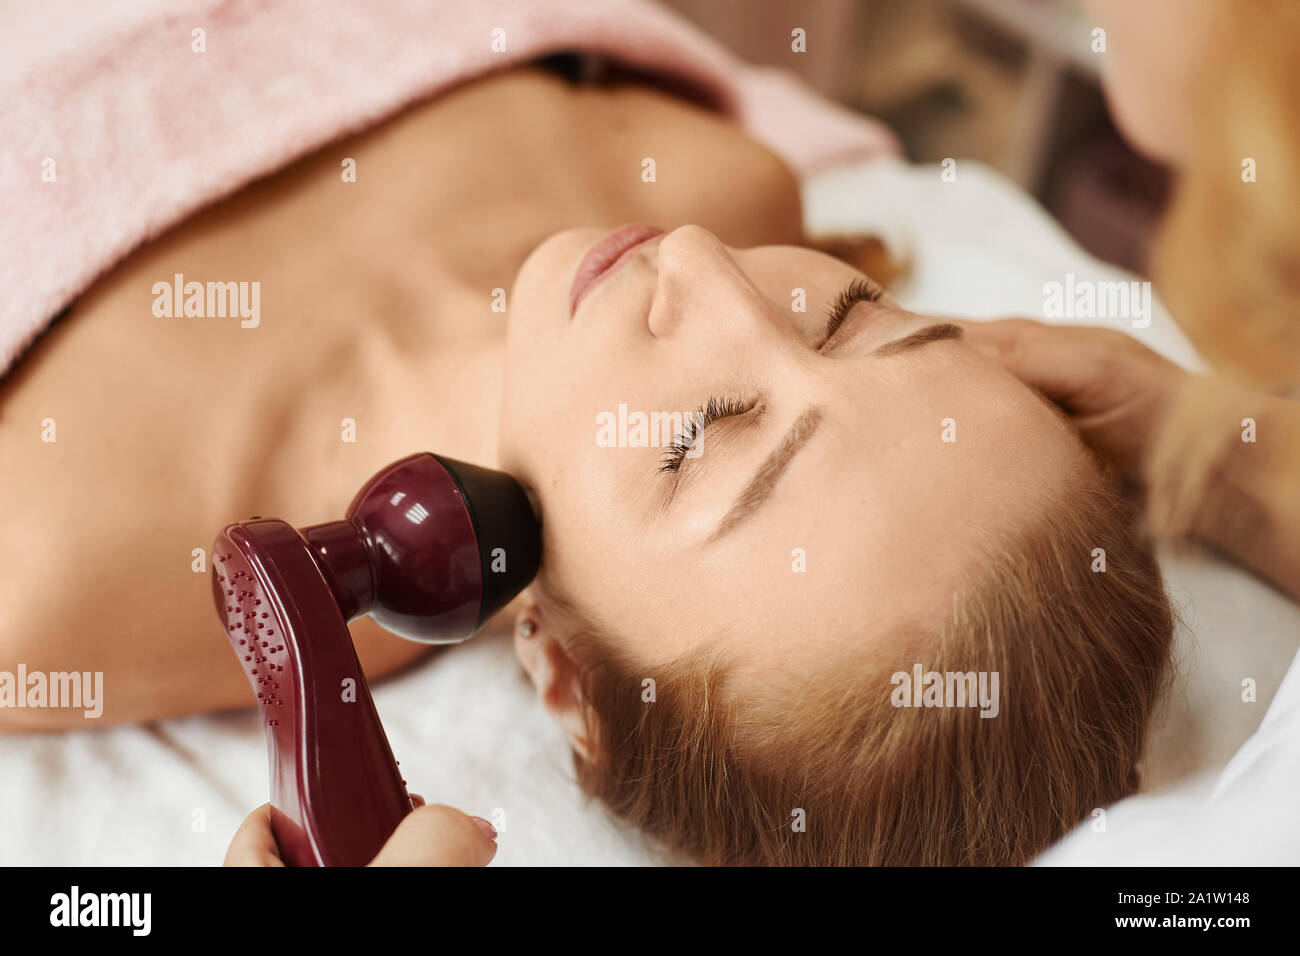 Beauty with perfect face skin on a non-surgical facelifting procedure. Woman receiving electric lift massage in spa salon. Electronic stimulation Stock Photo